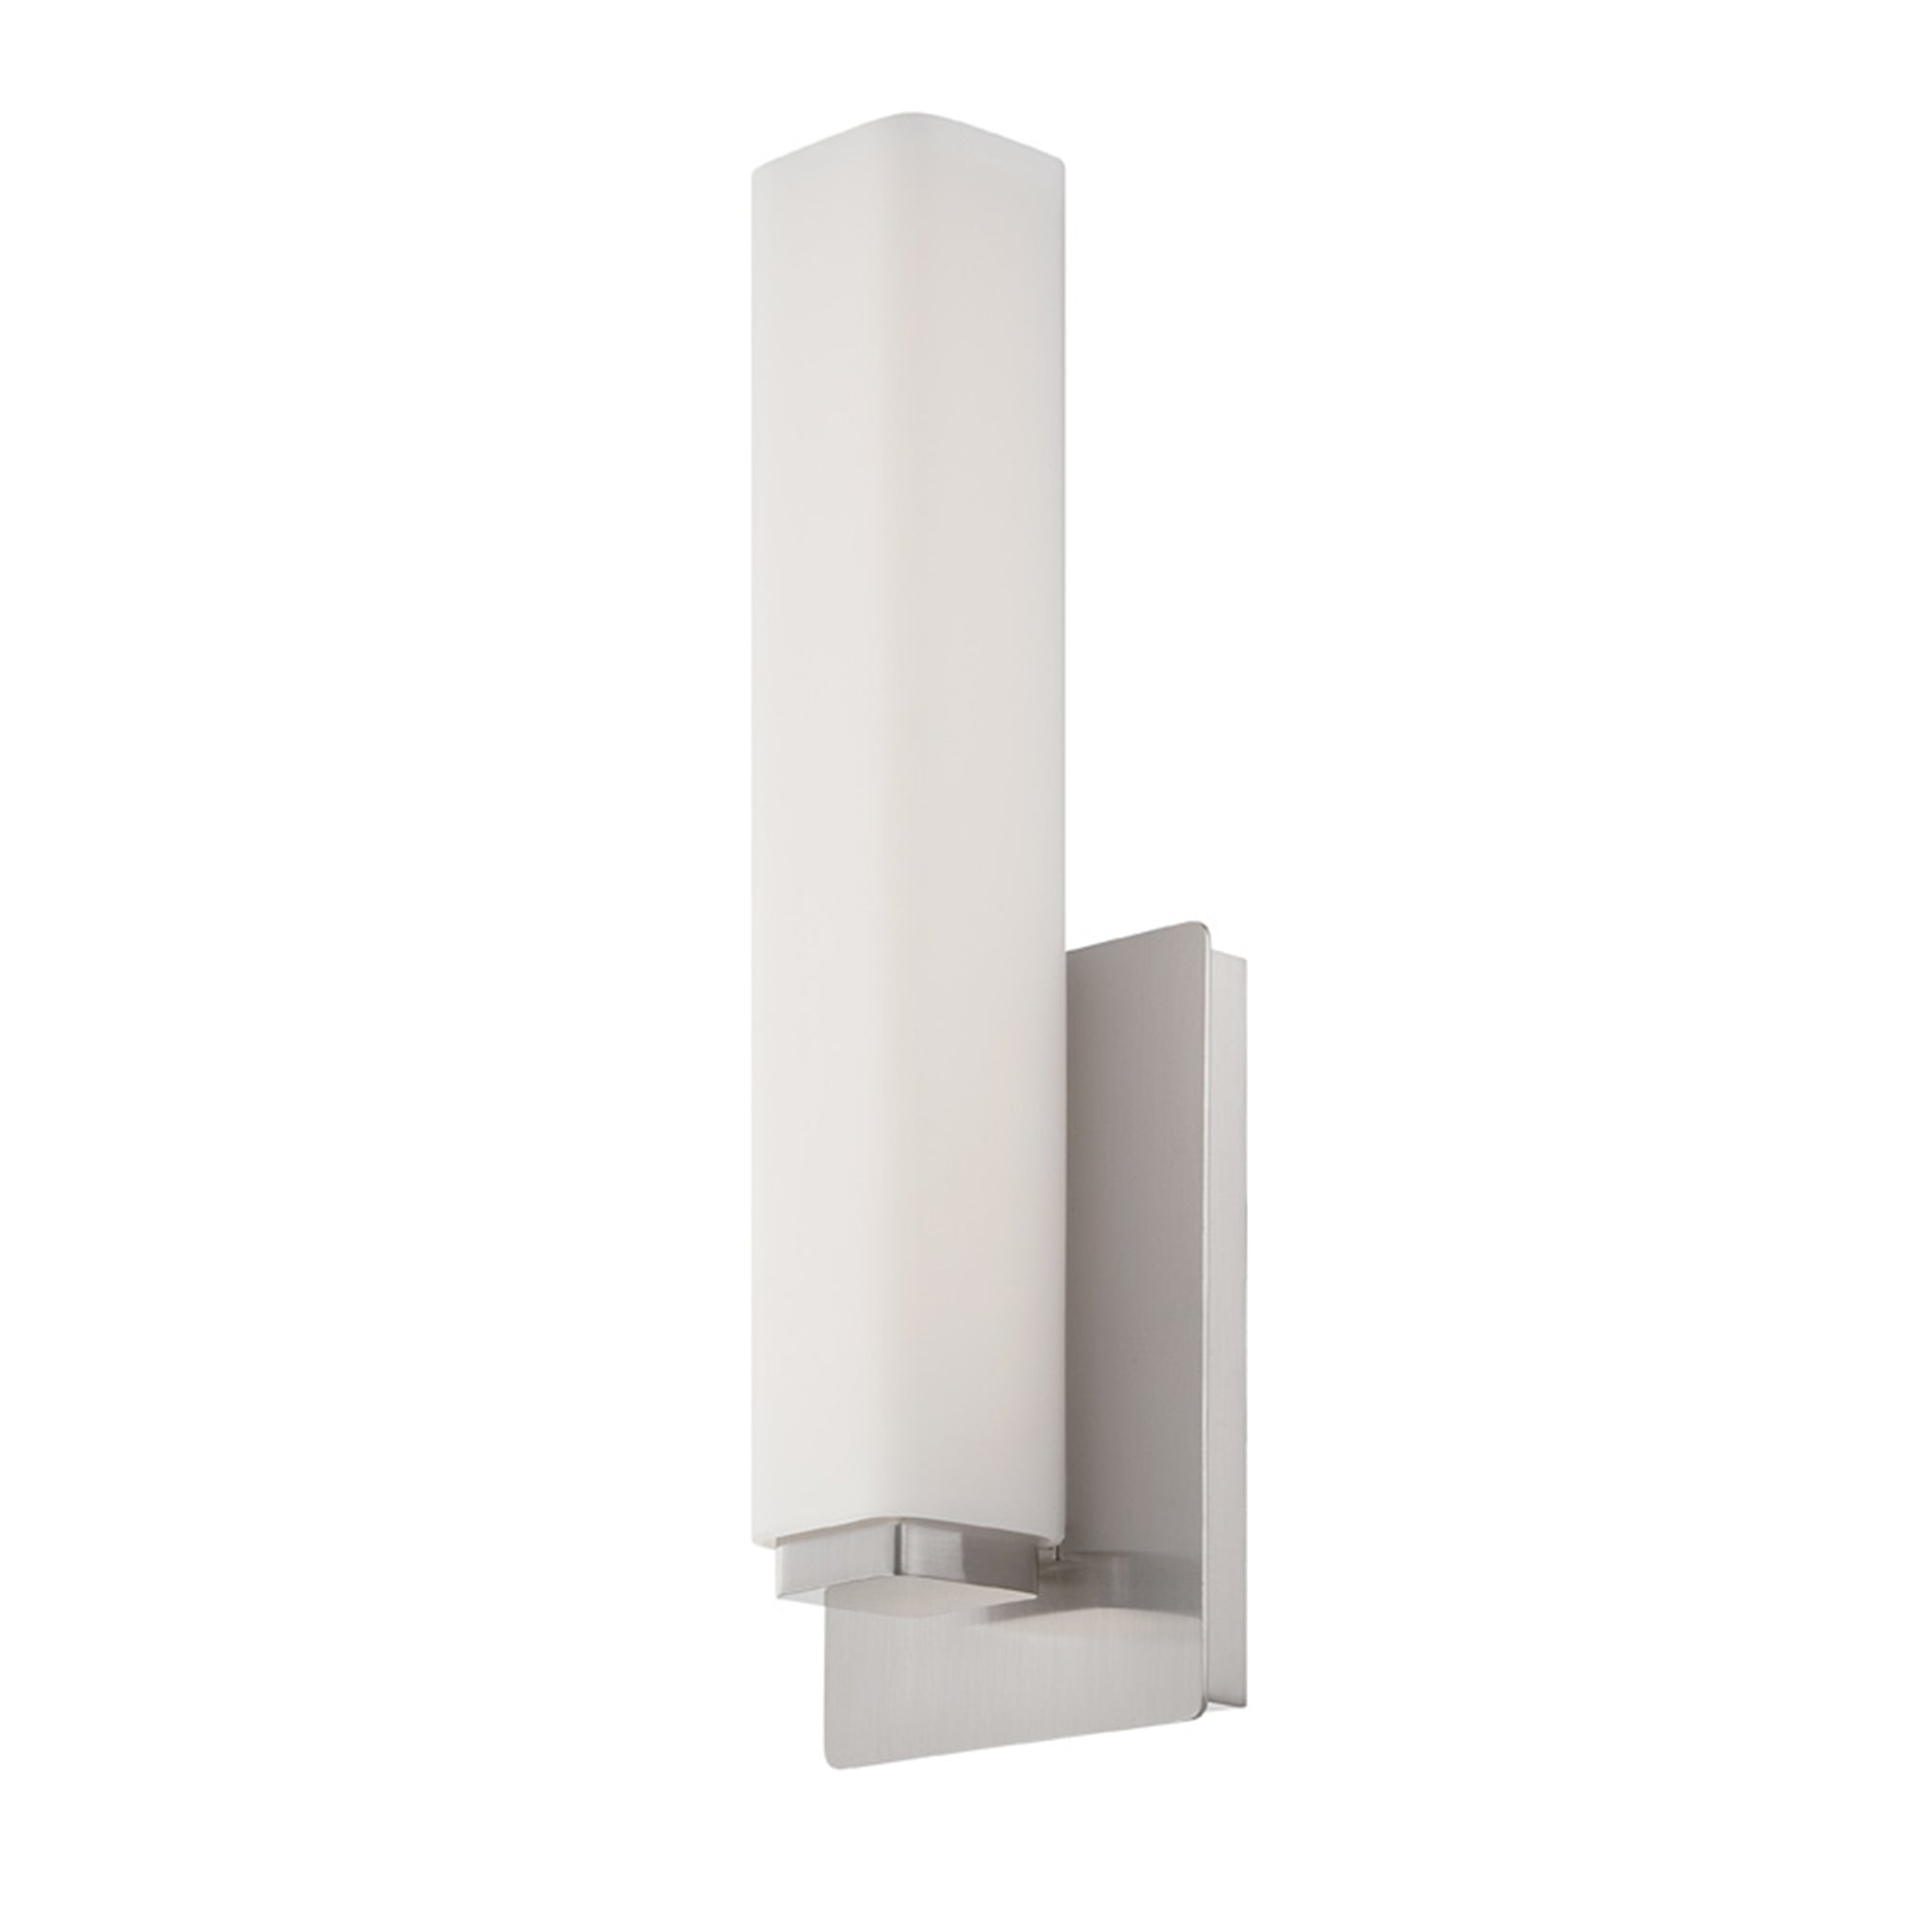 VOGUE Sconce Nickel INTEGRATED LED - WS-3115-35-BN | MODERN FORMS